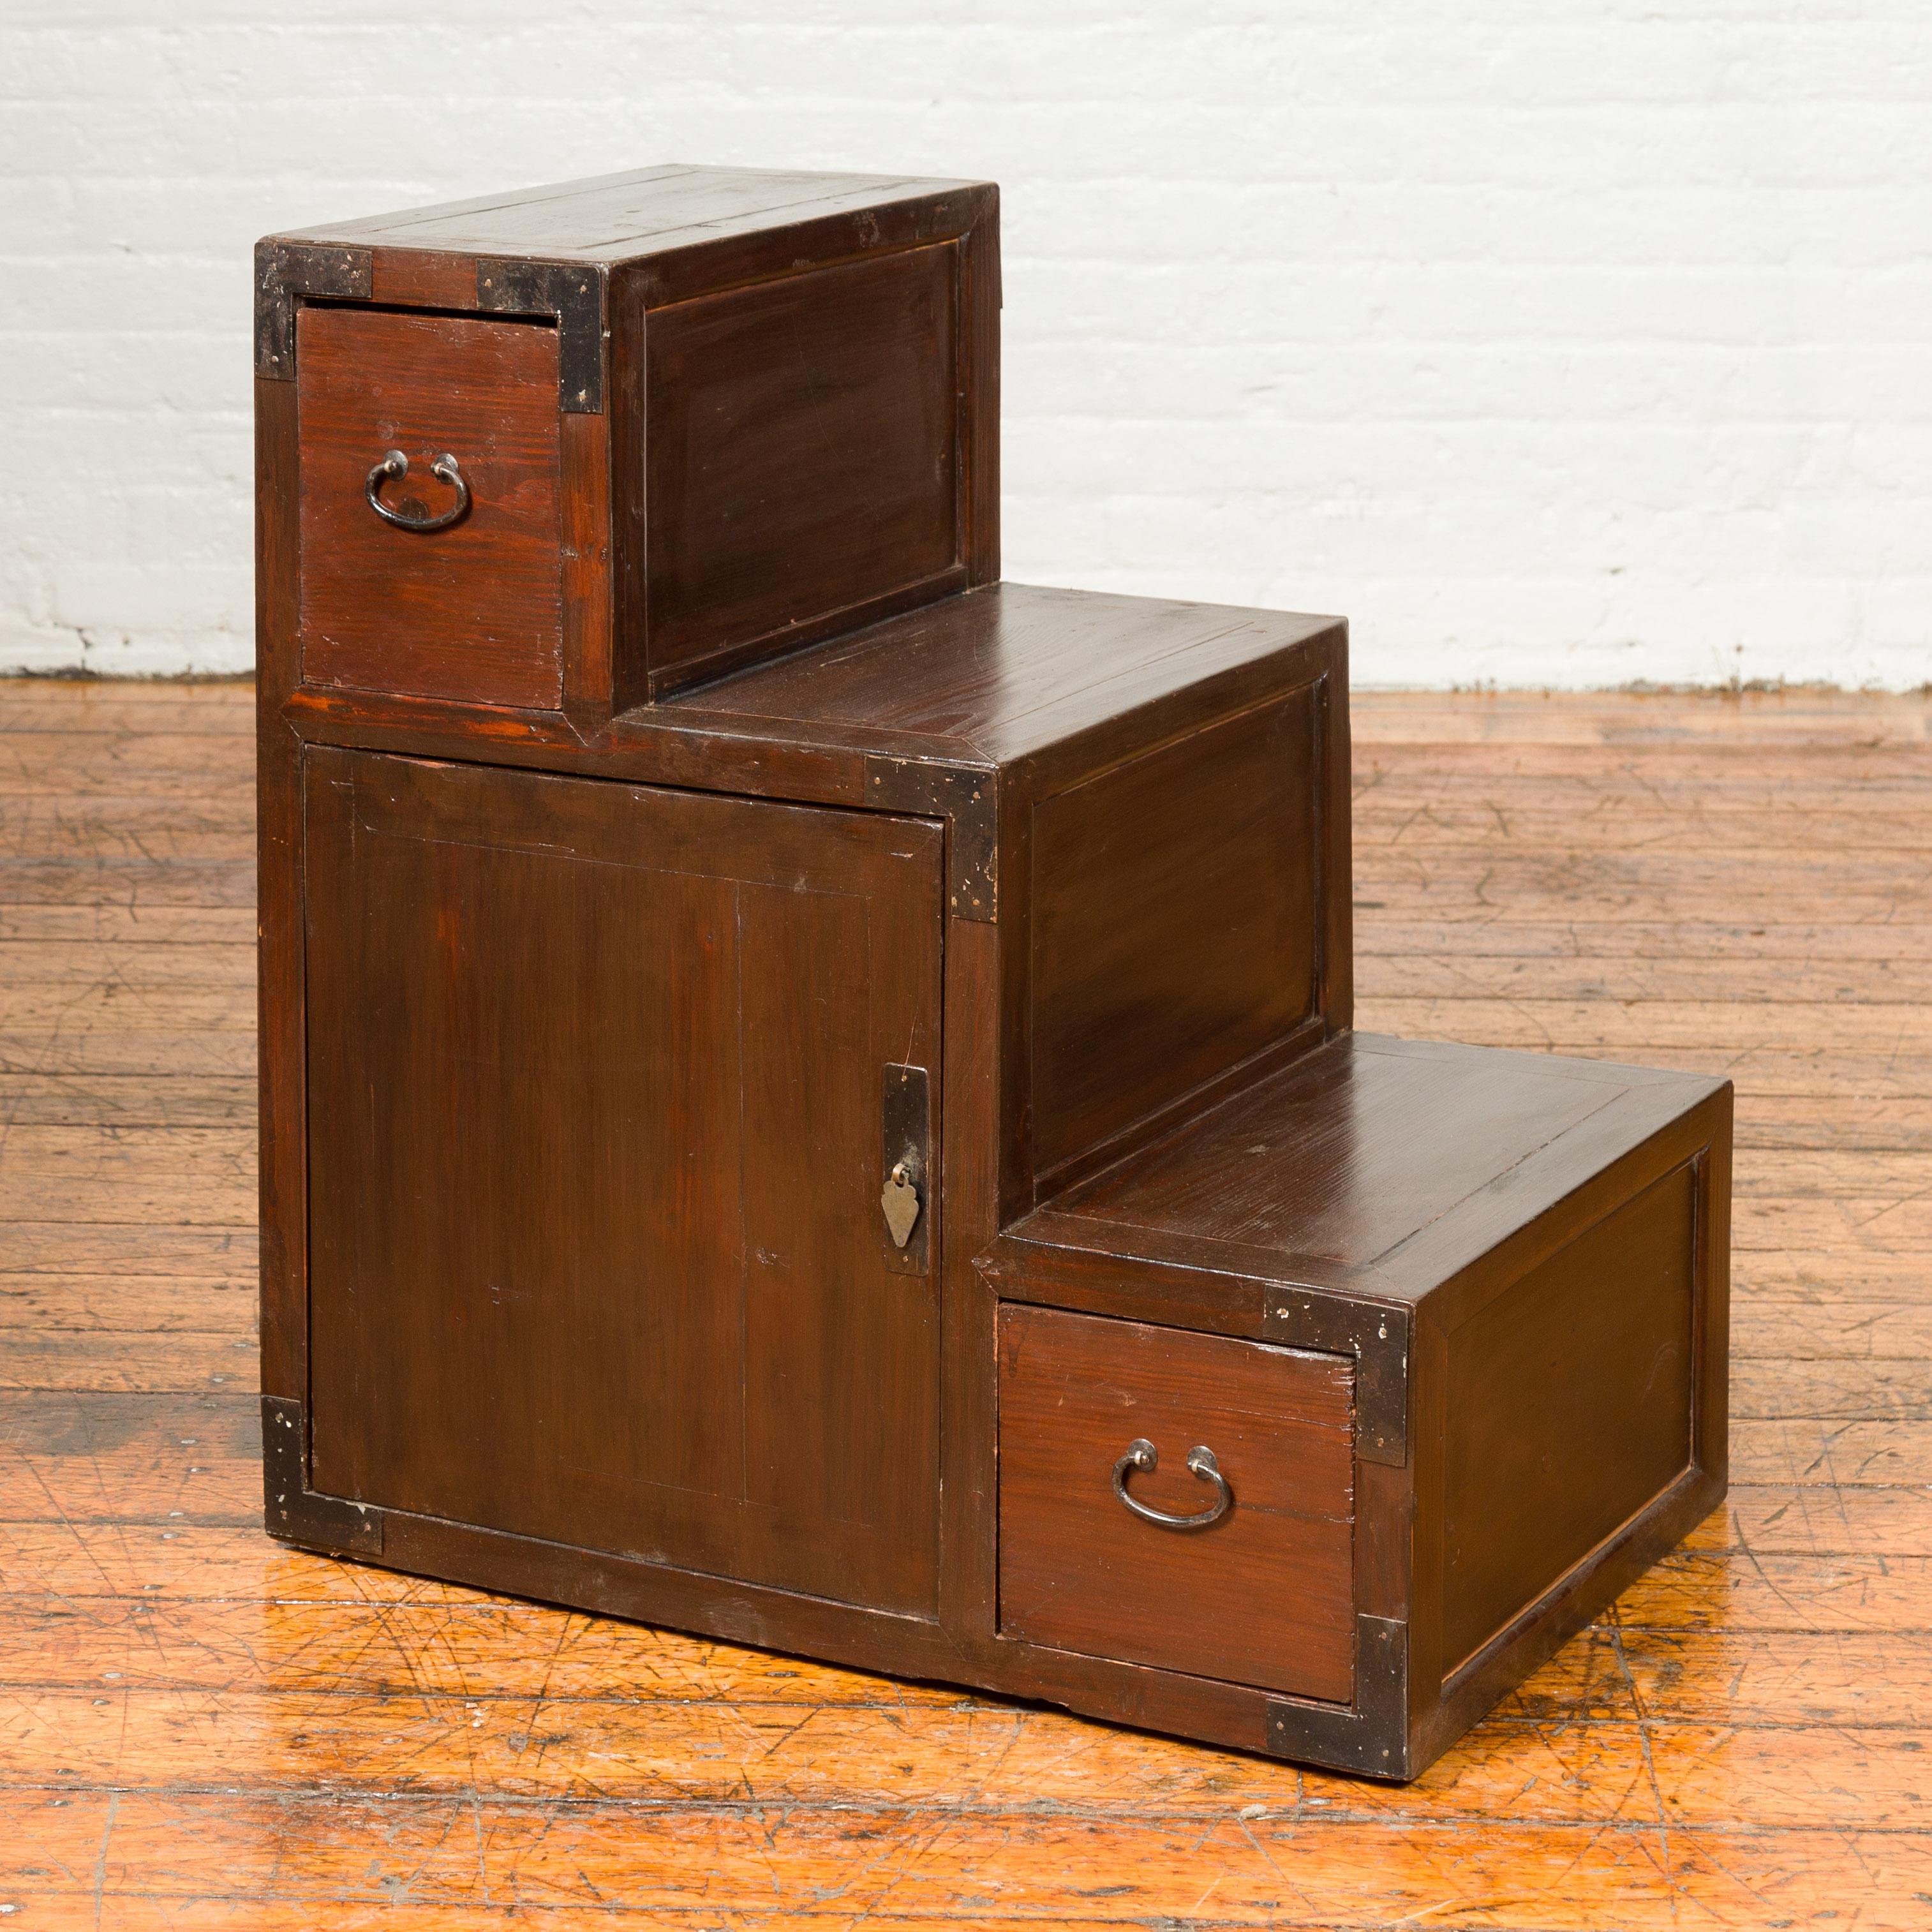 A Japanese staircase tansu cabinet from the 19th century, with two drawers and doors. Born in Japan during the 19th century, this staircase tansu features a convenient stepped storage unit presenting a warm patina. Ideal to display decorative items